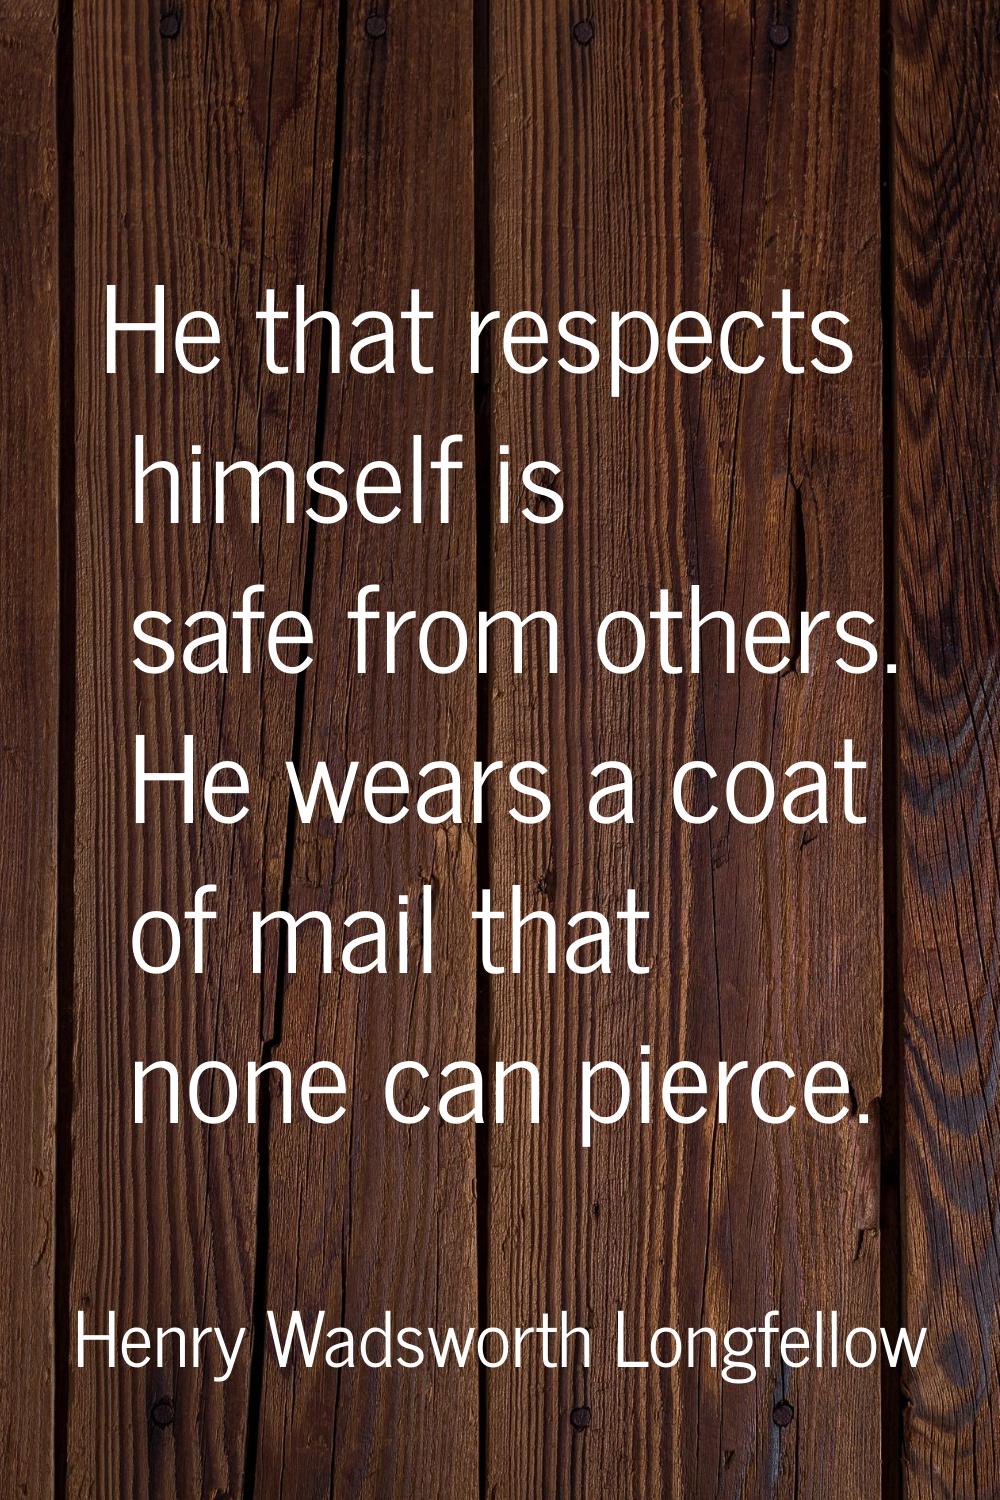 He that respects himself is safe from others. He wears a coat of mail that none can pierce.